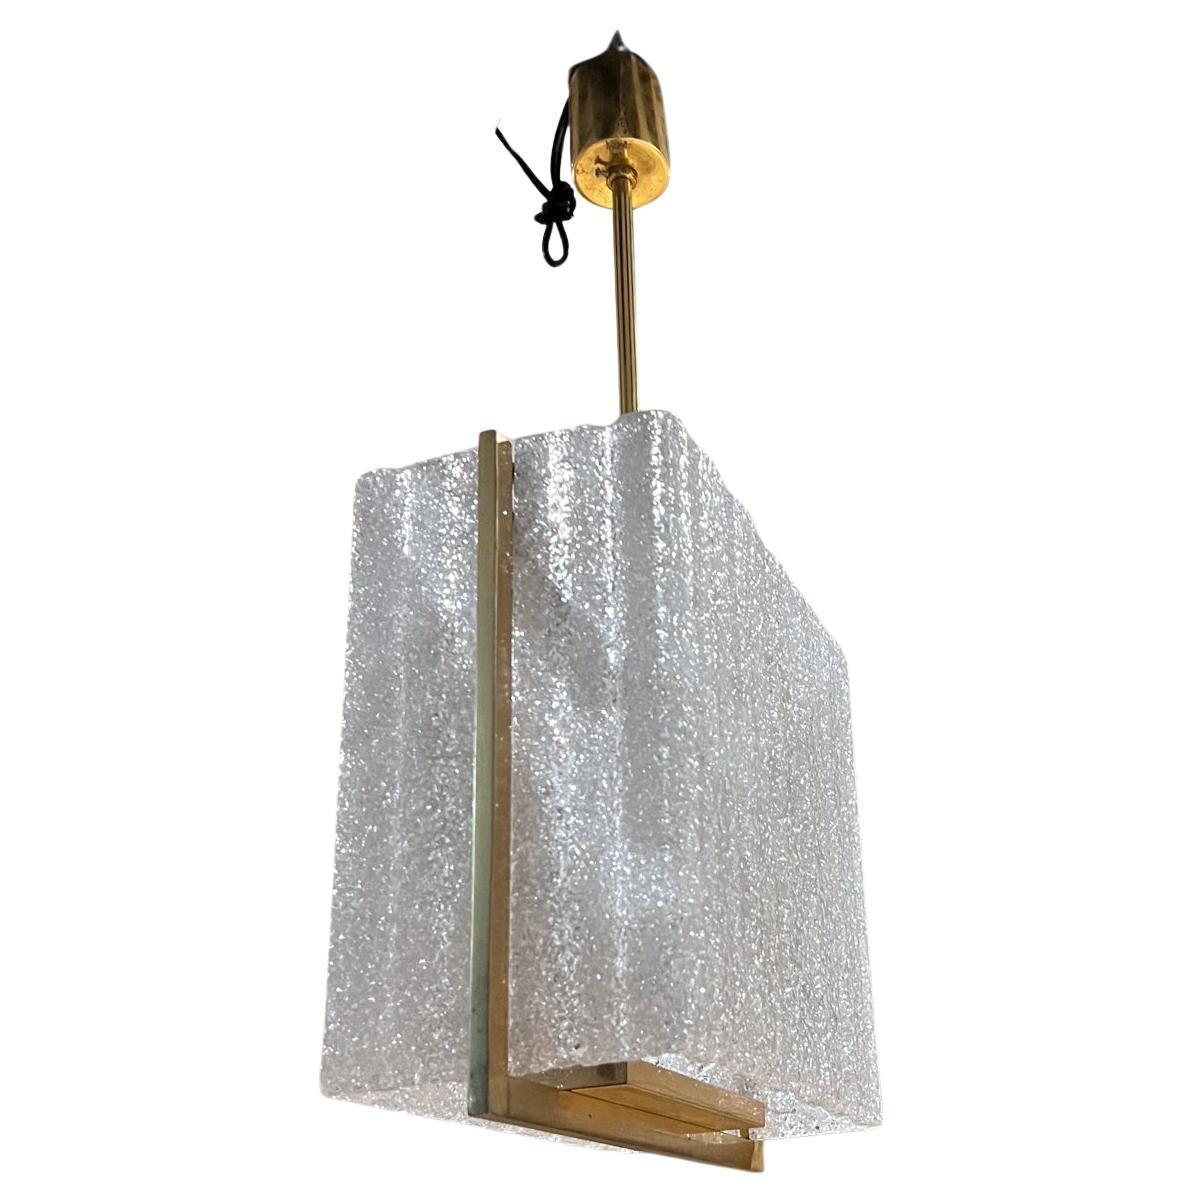 1960s French Pendant Lamp Style Maison Arlus Textured Plexiglass Brass For Sale